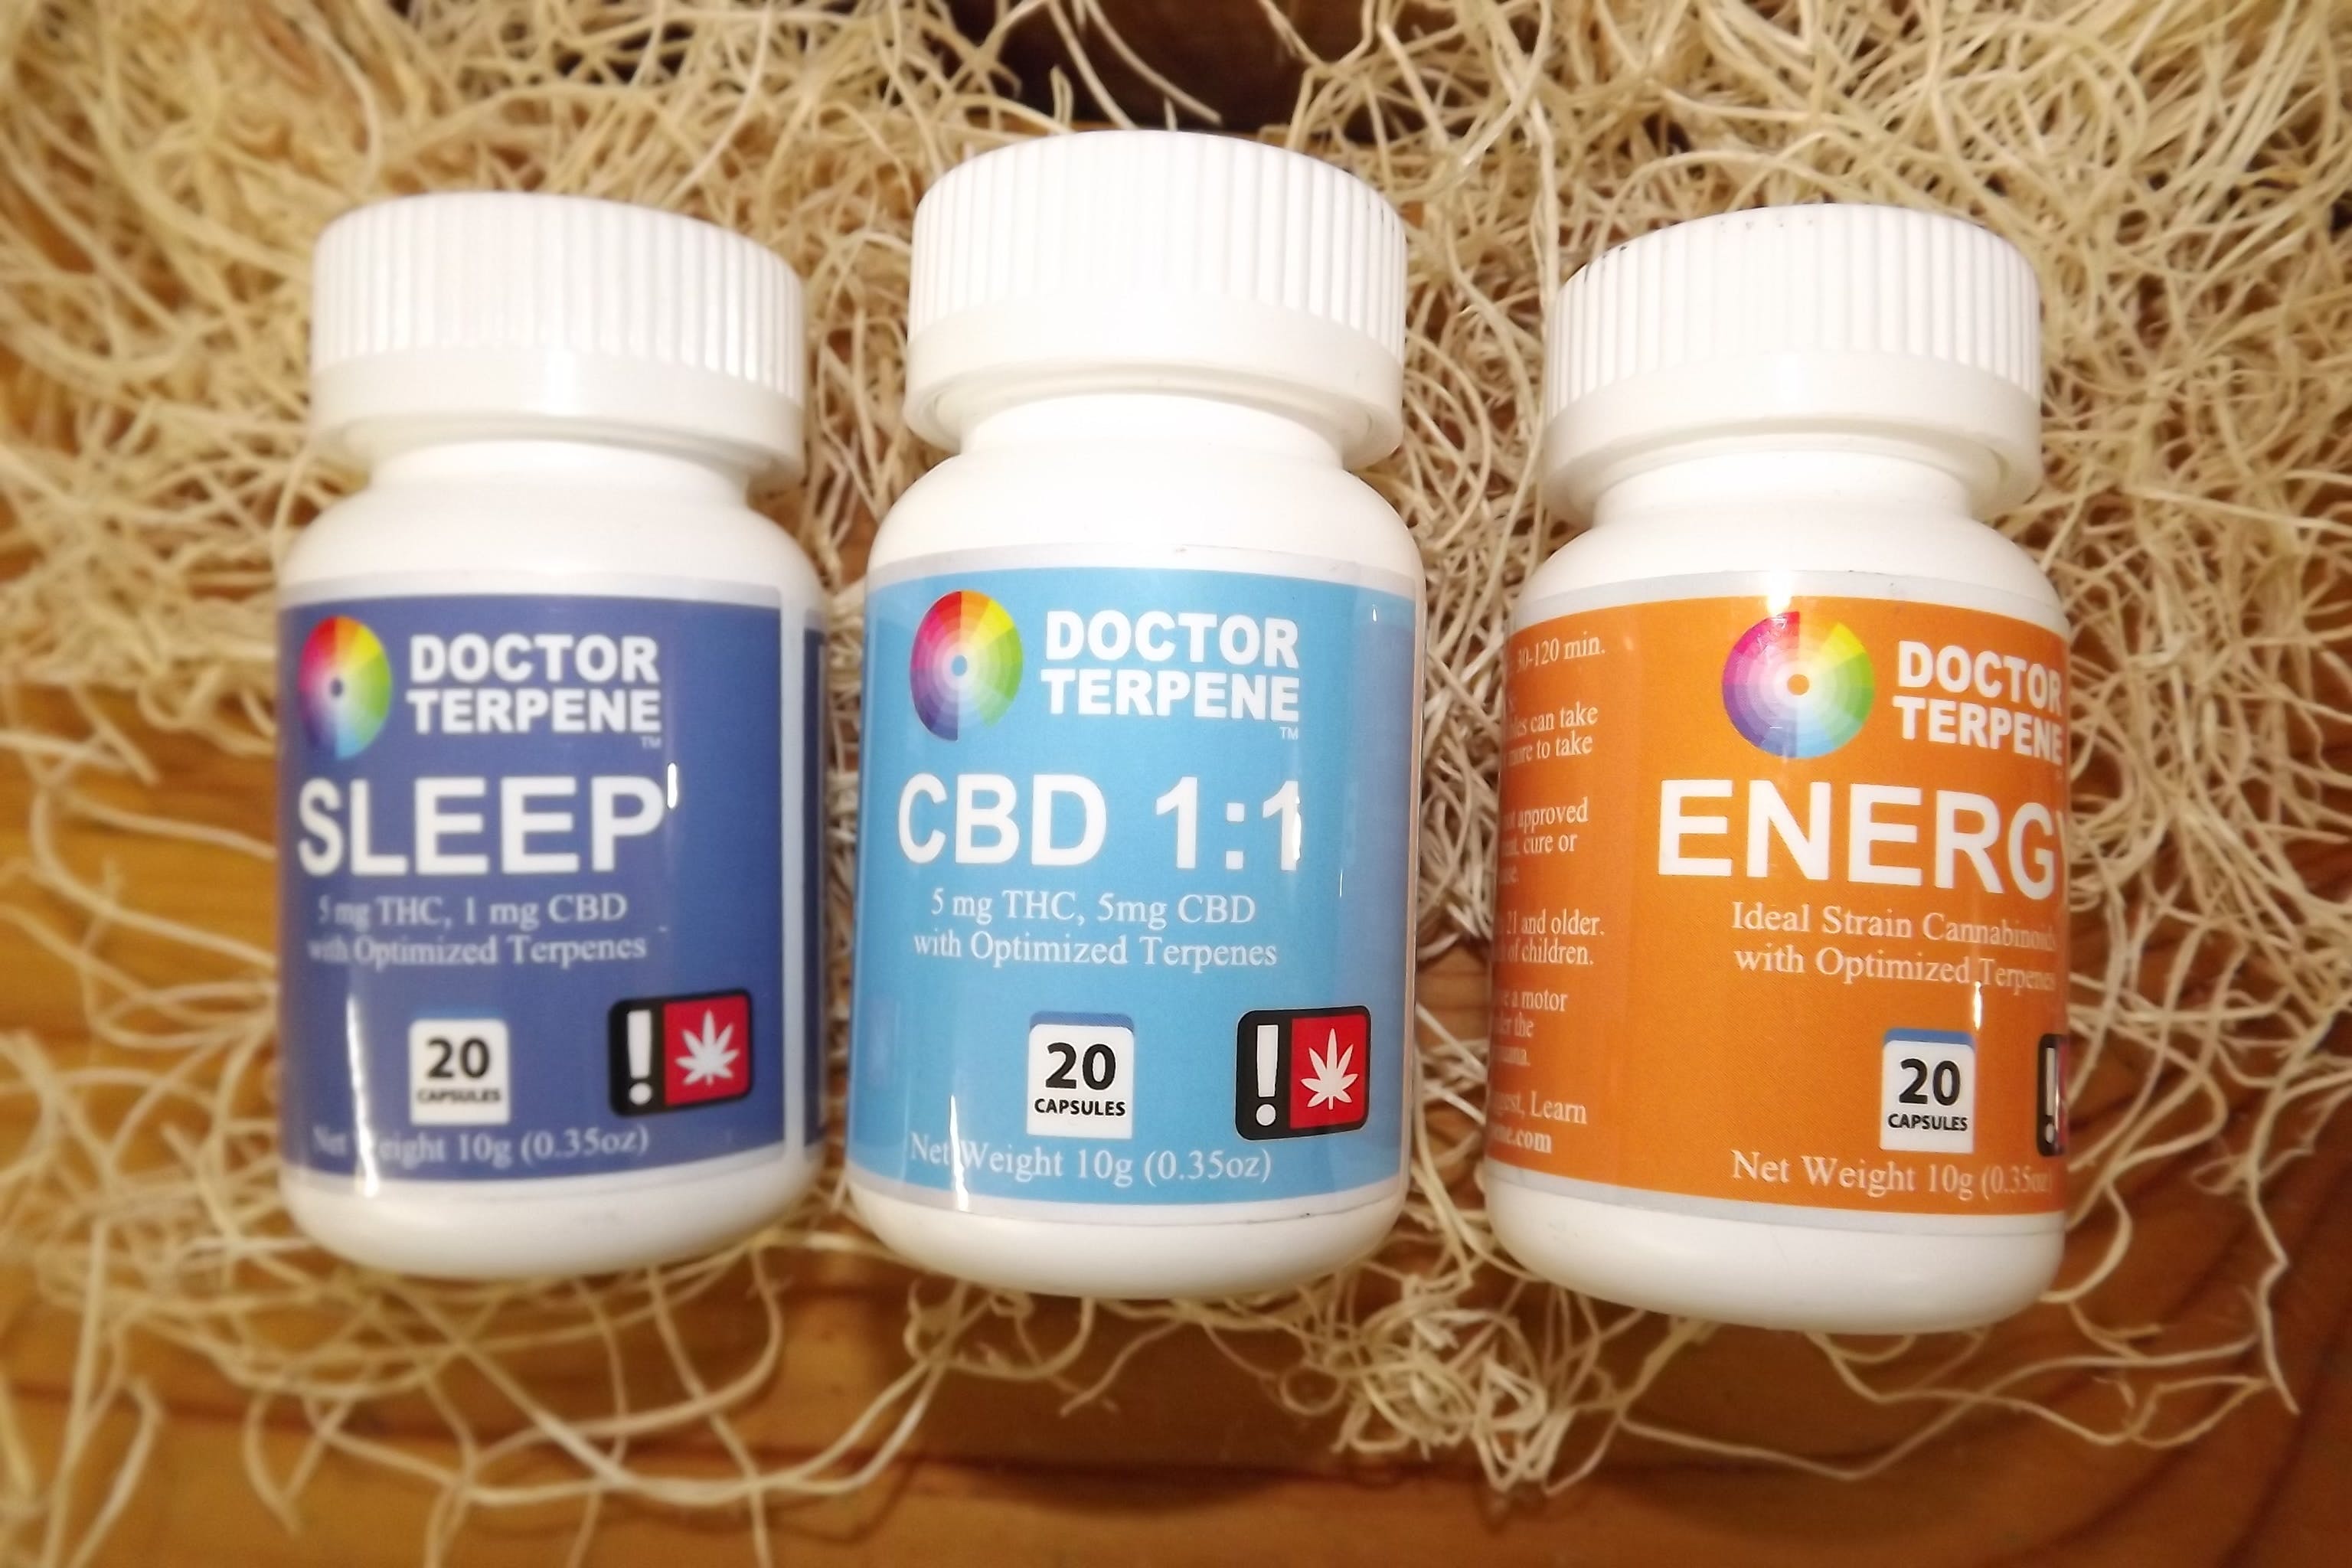 edible-doctor-terpene-capsules-5-options-available